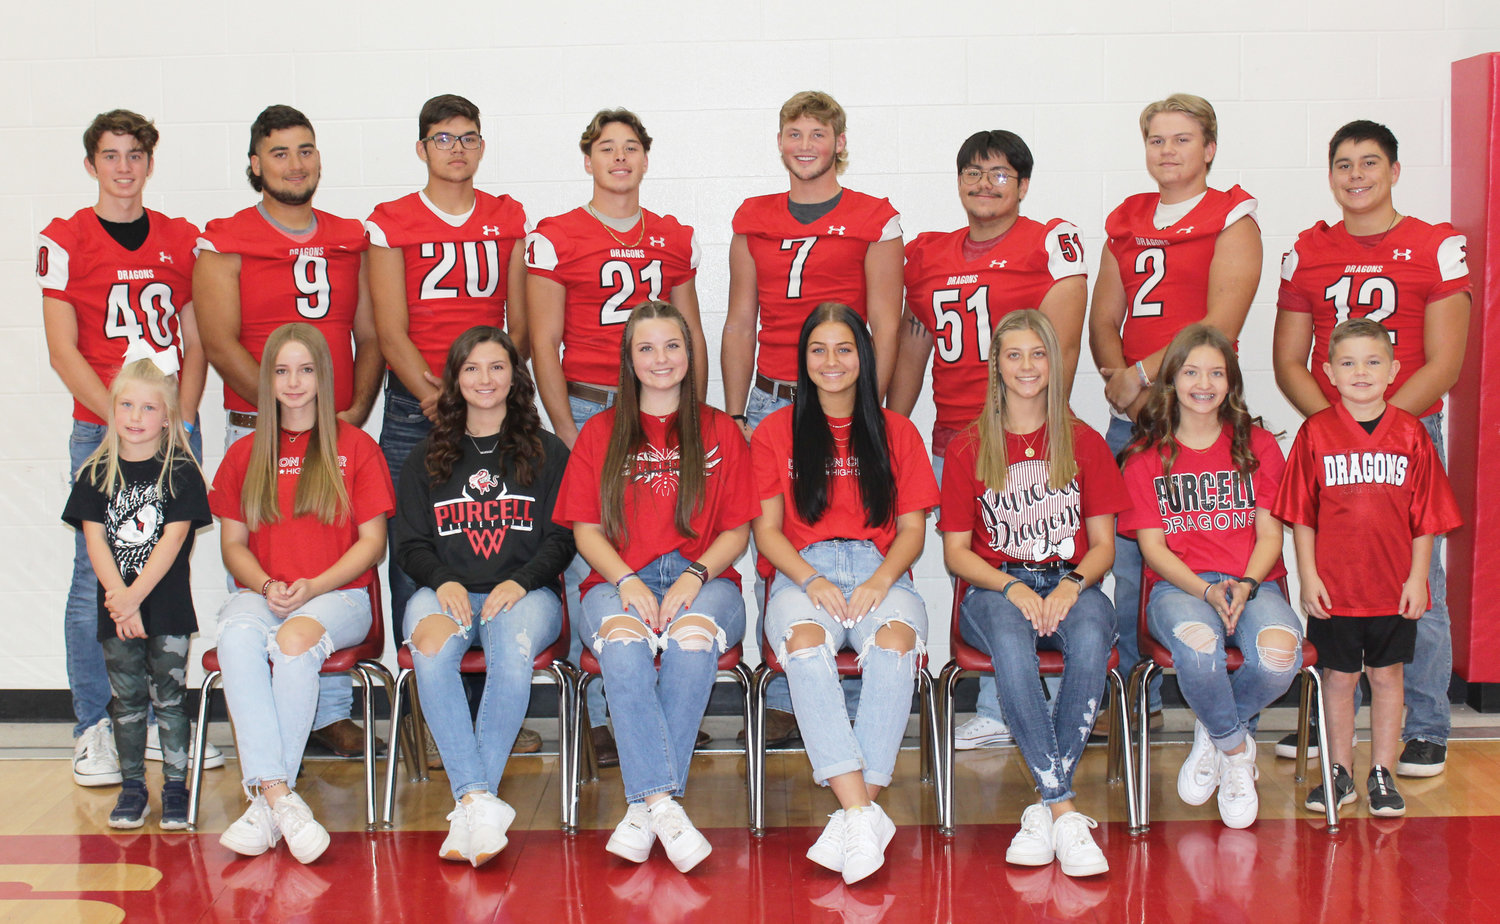 Purcell High School’s homecoming court members are, front row from left, Maebry Simmons, Gracie Pruitt, Jaiden Avila, Alexis Brock, Grace Smith, Hailey Dempsey, Emma Lynn and Trigg Anderson. In the back row from left are Xander Springael, Brodrick Smith, Quentin Goforth, Titus Mason,Creed Smith,Mateo Ramirez,Hayden Harp and Zicorrie Davis. The Dragons will play Christian Heritage Academy Crusaders on Friday.